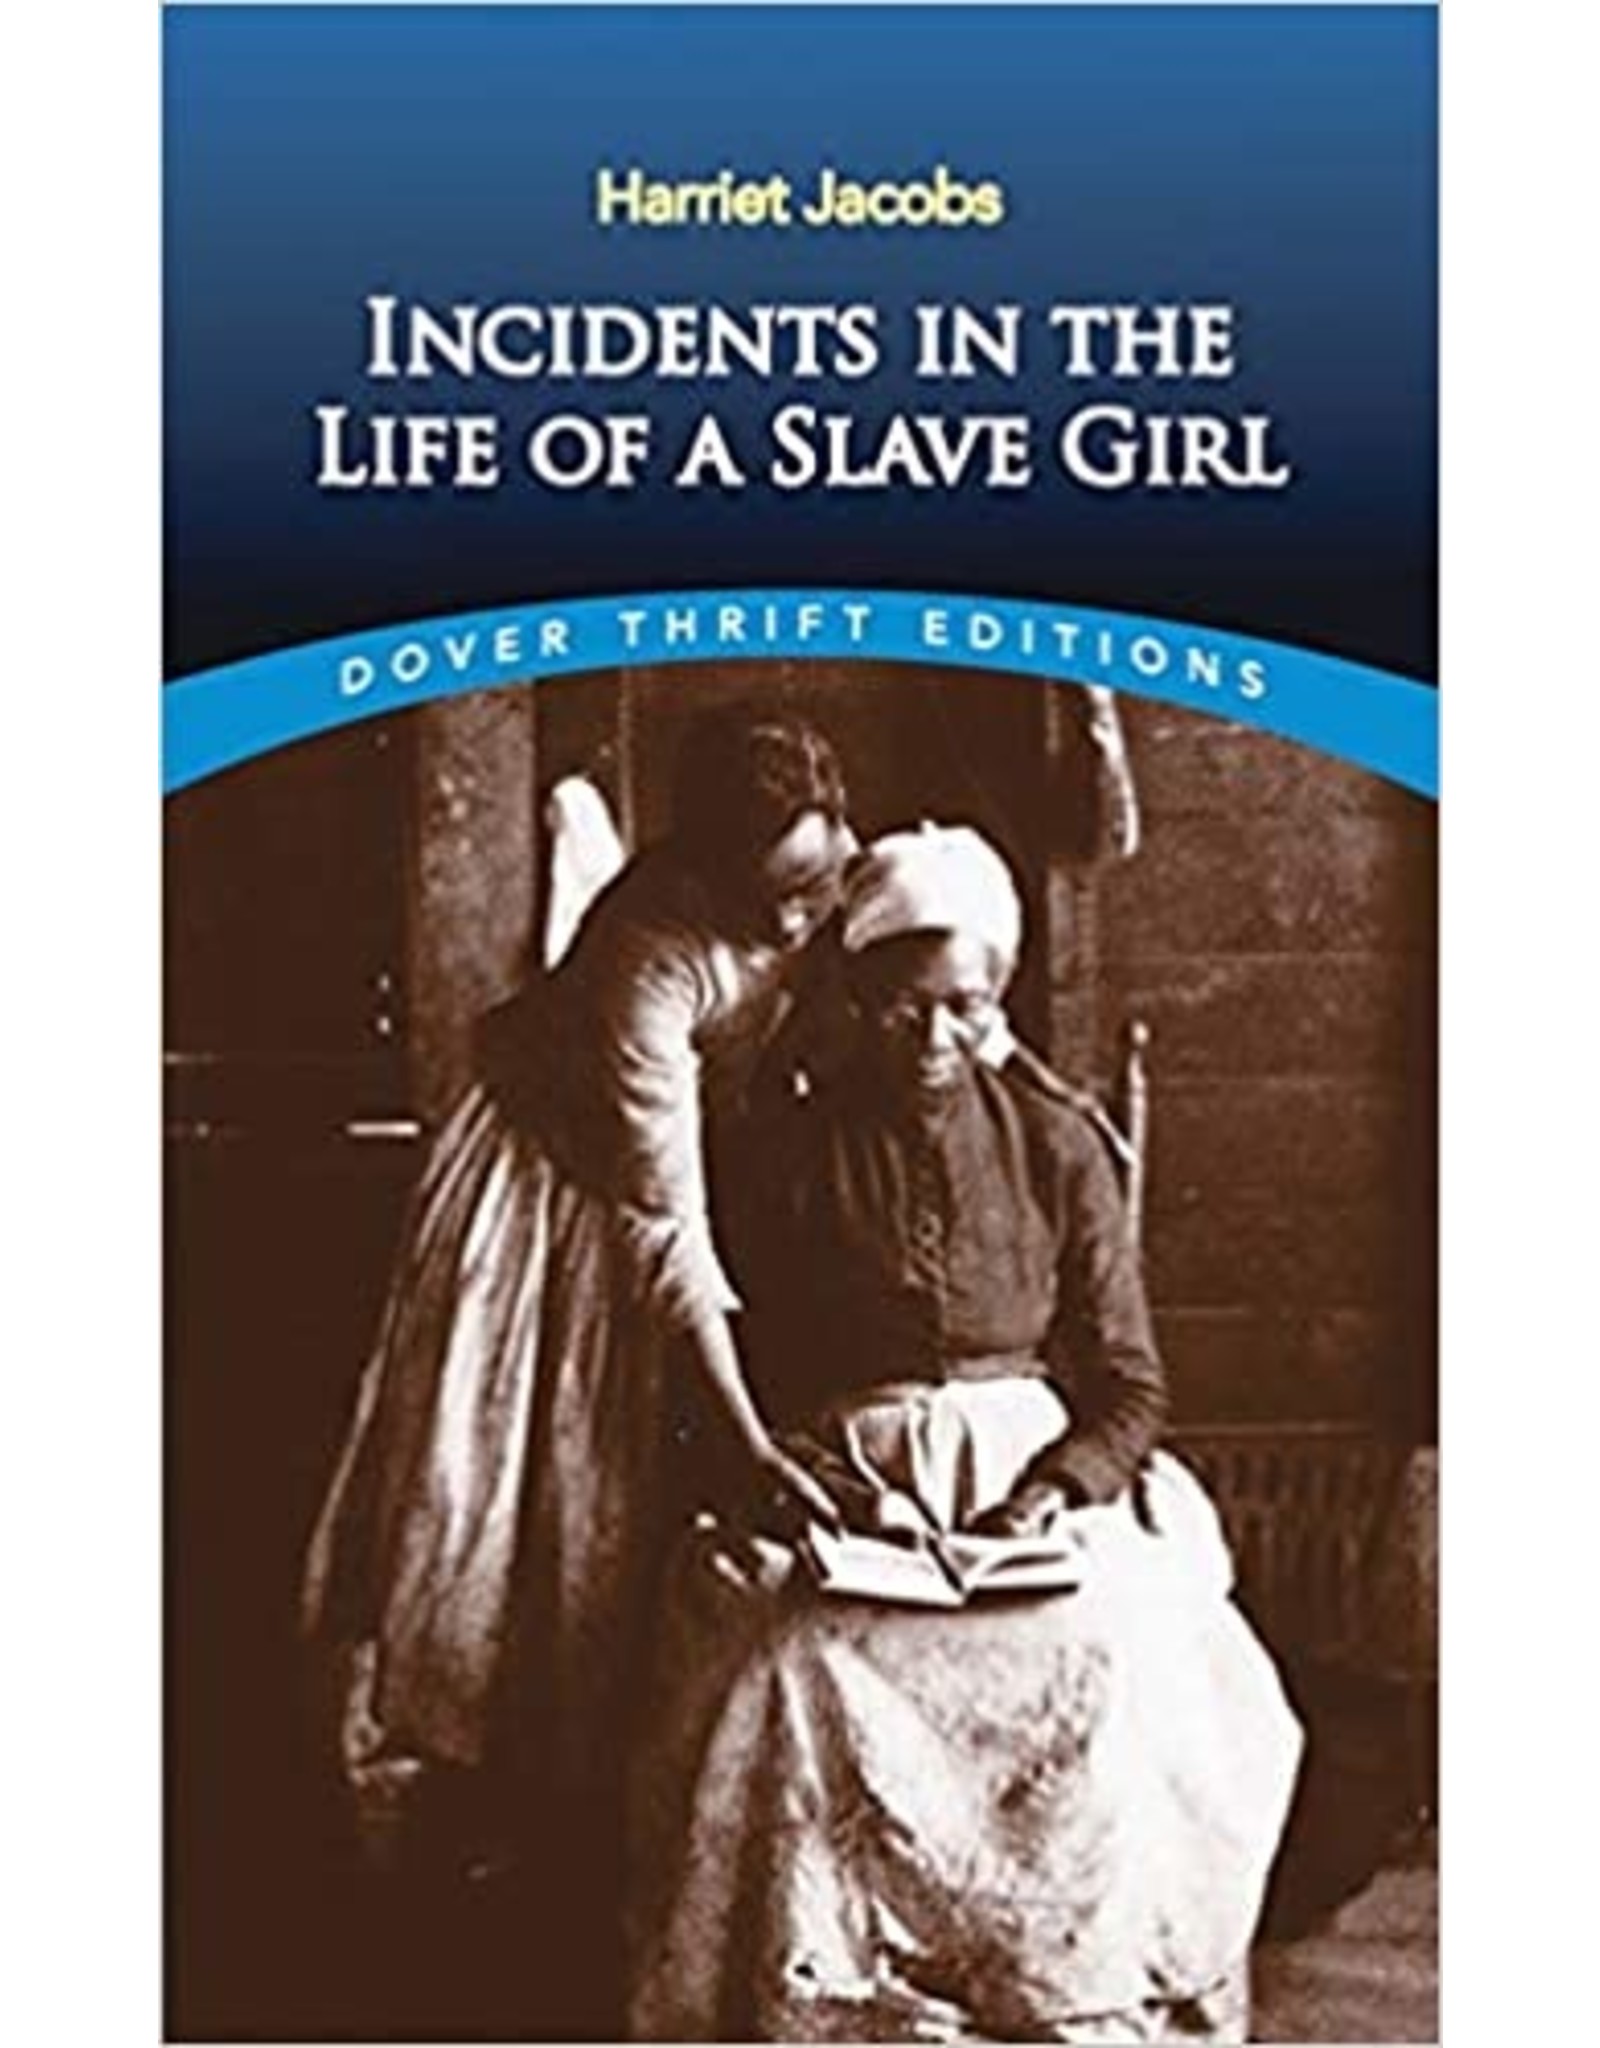 Dover Thrift Incidents in the Life of a Slave Girl